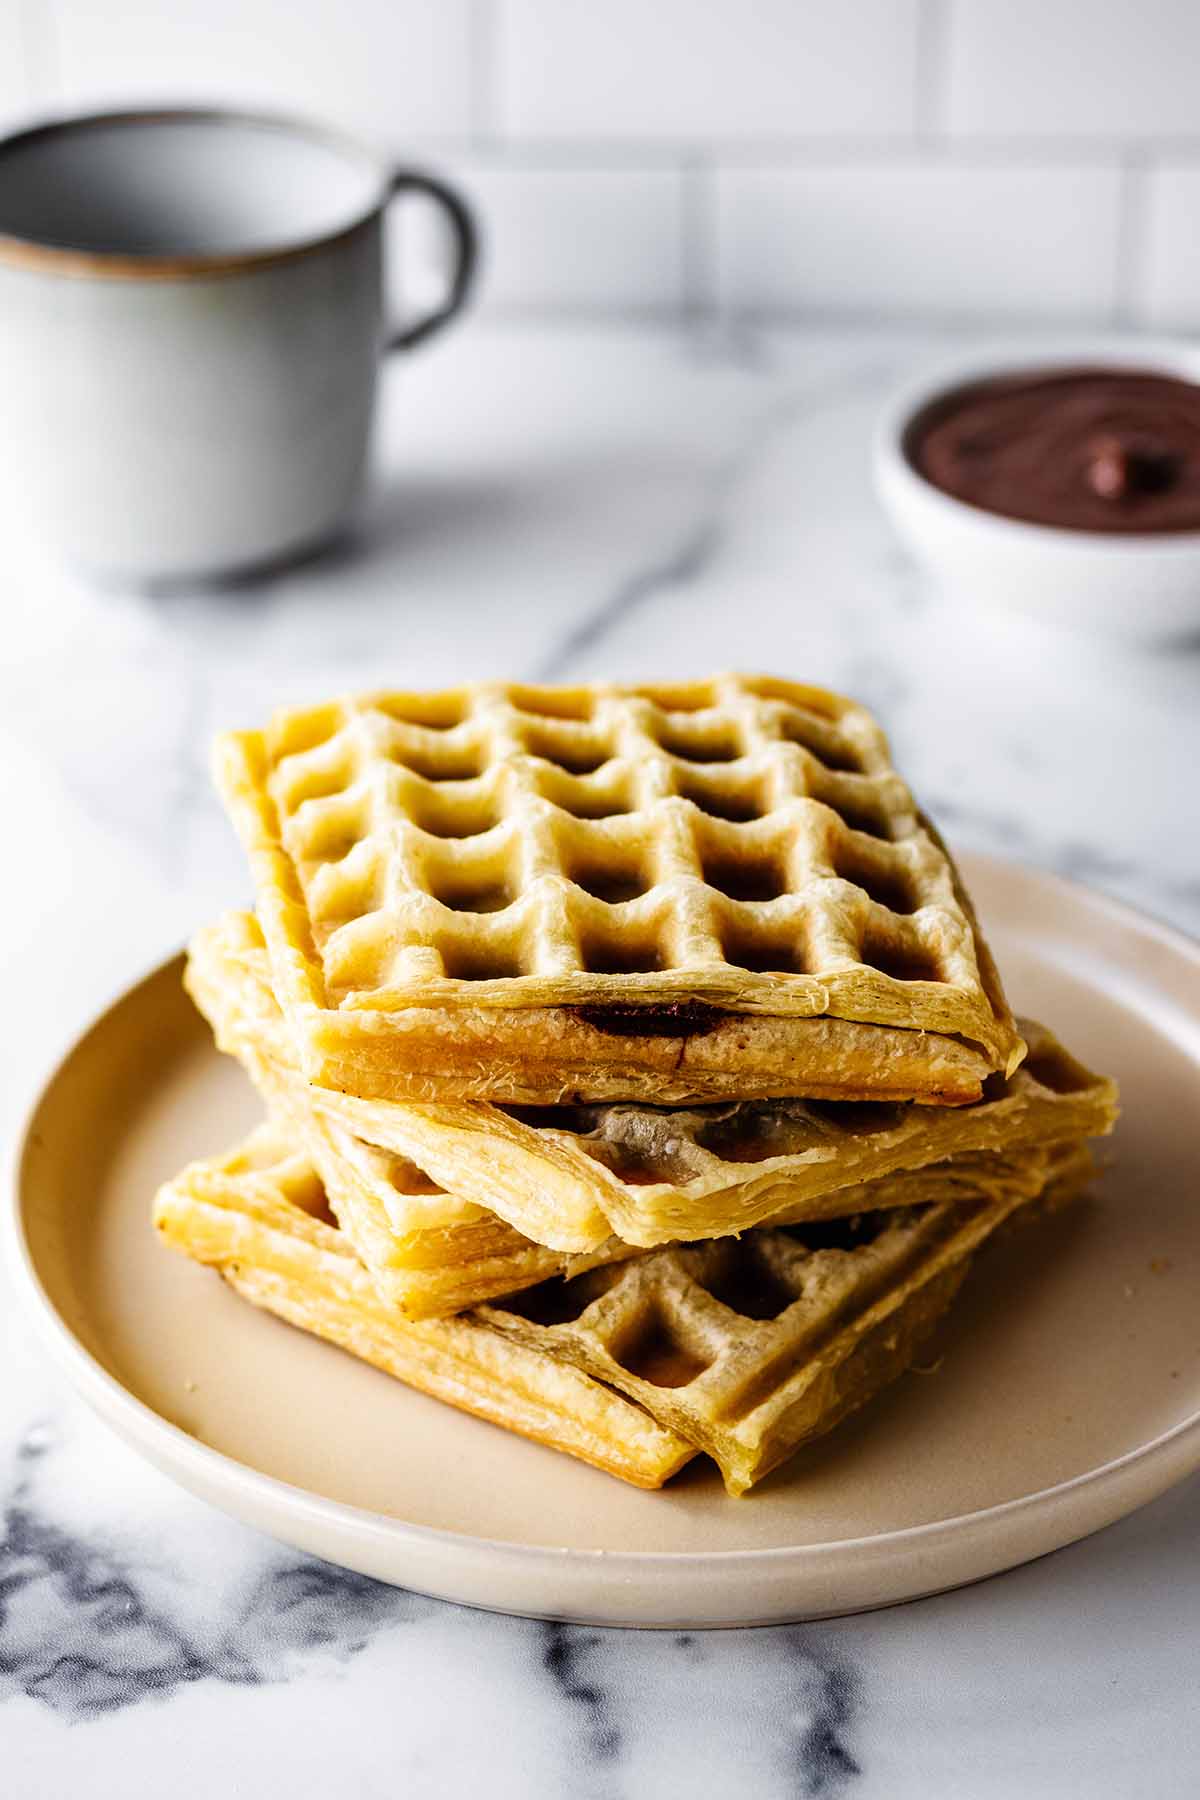 Stack of Nutella waffles on a creamy white plate a bowl of Nutella and coffee mug are in the background